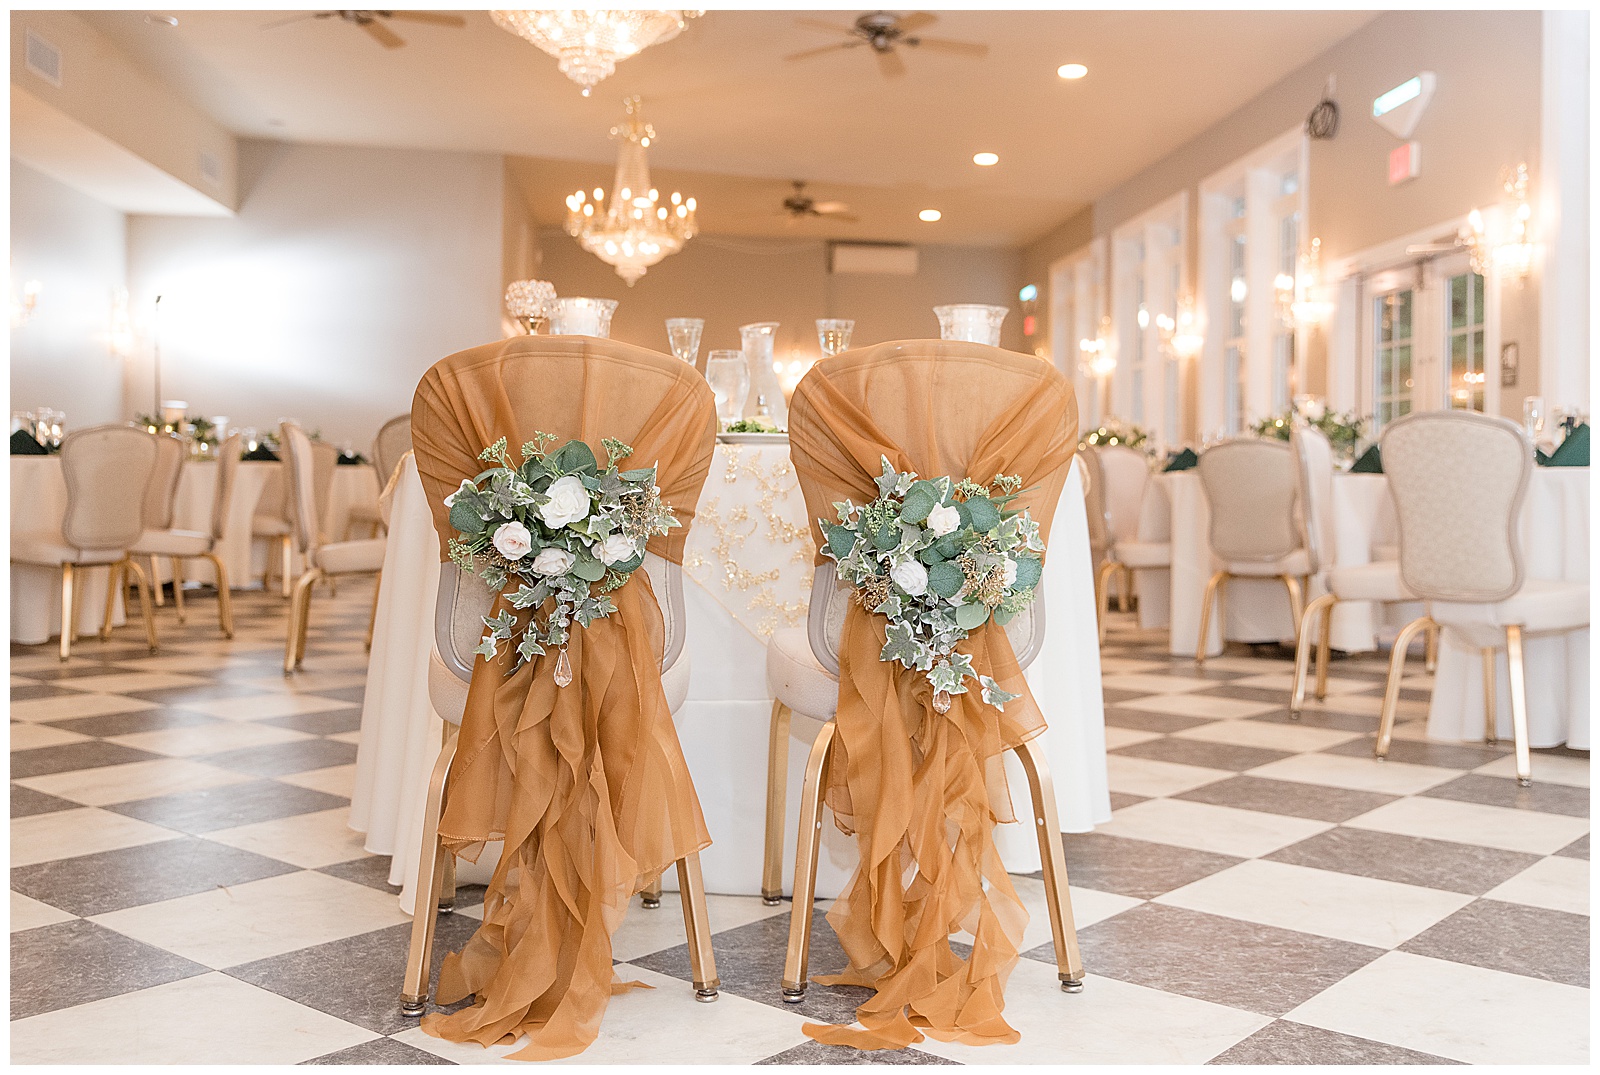 beautifully decorated chairs for the bride and groom to sit on at wedding reception wrapped in golden fabric with fresh flower bouquets attached